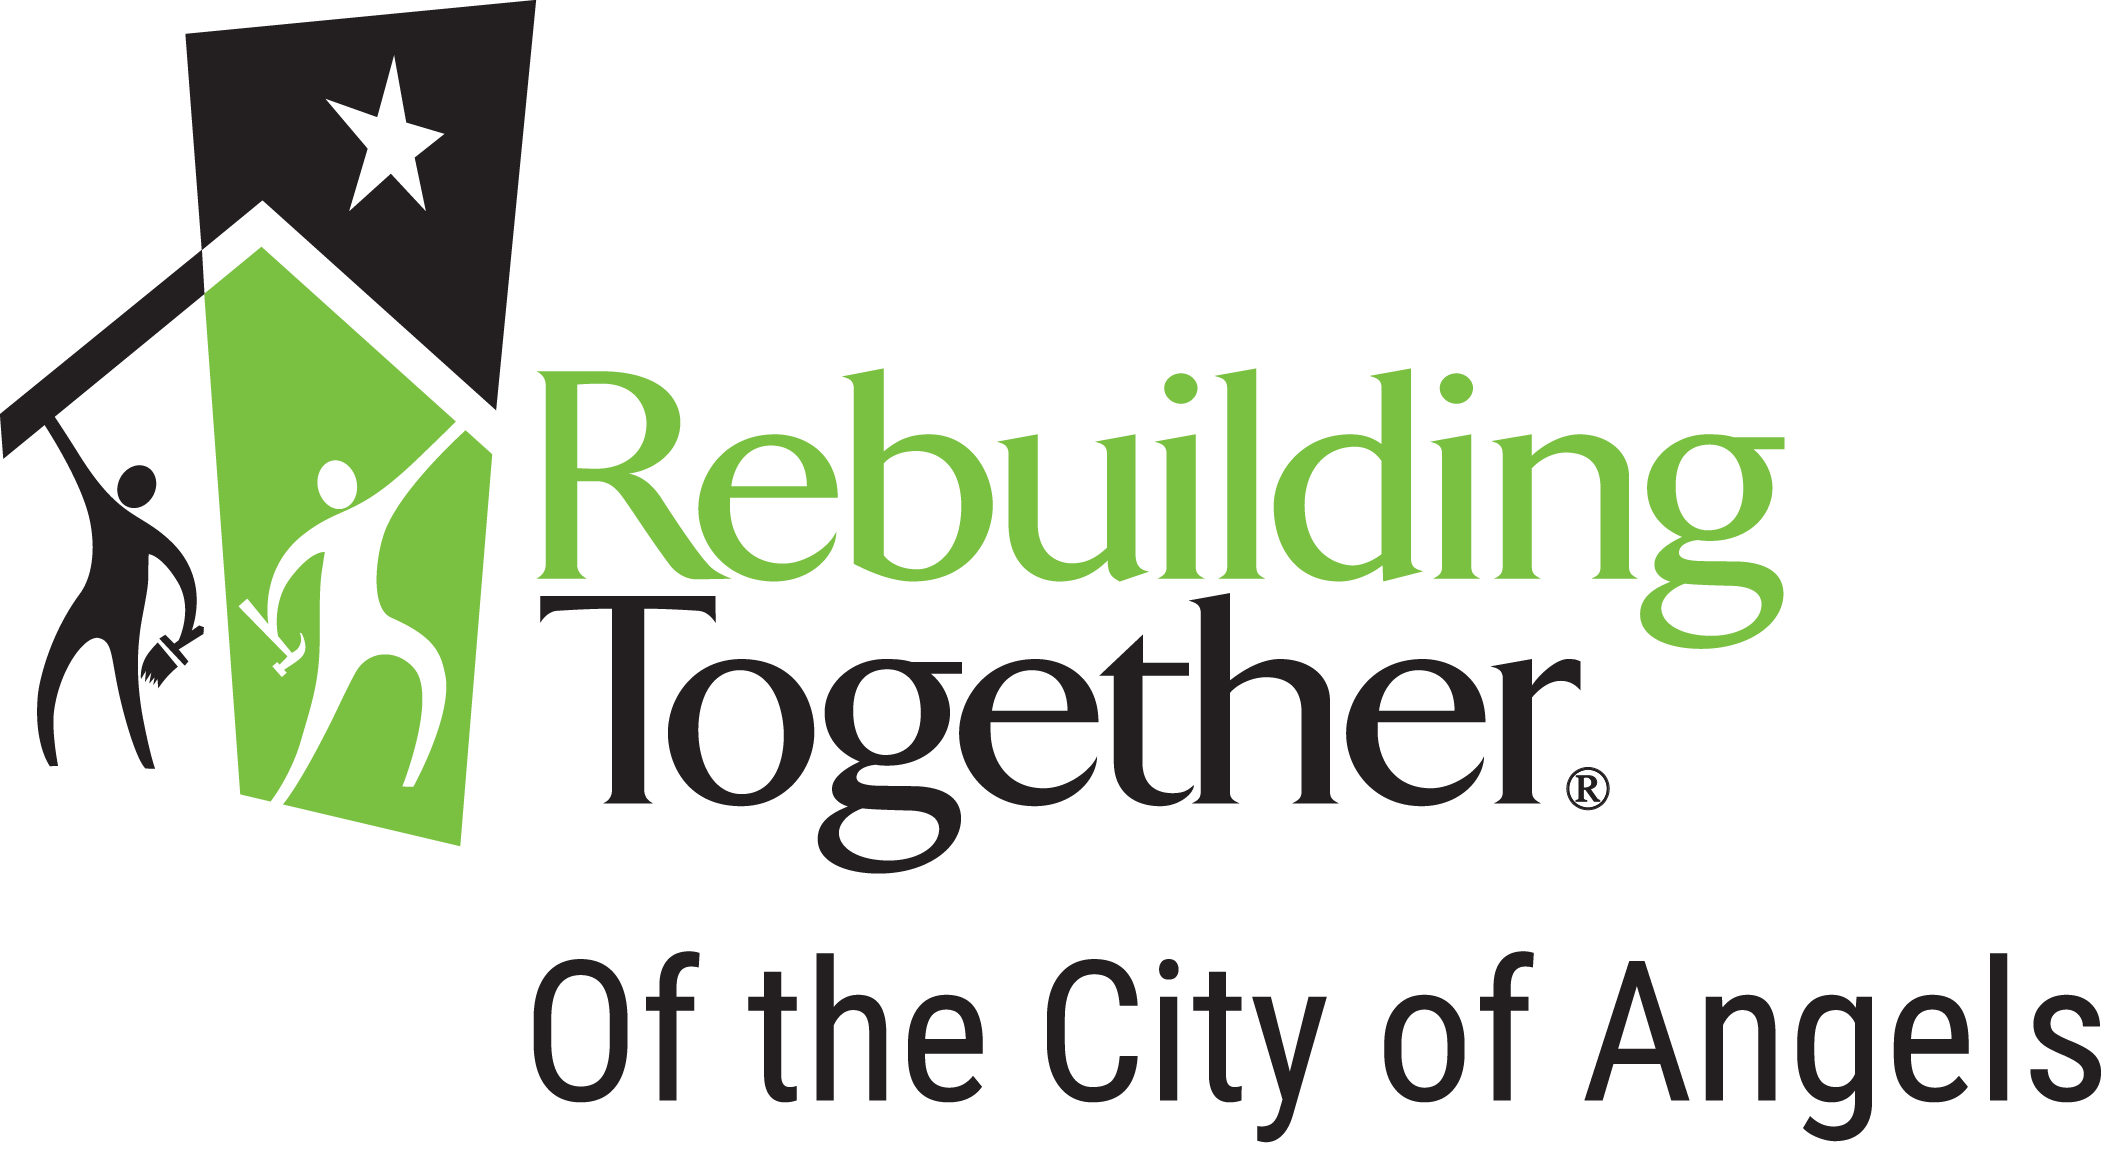 Rebuilding Together Of the City of Angels